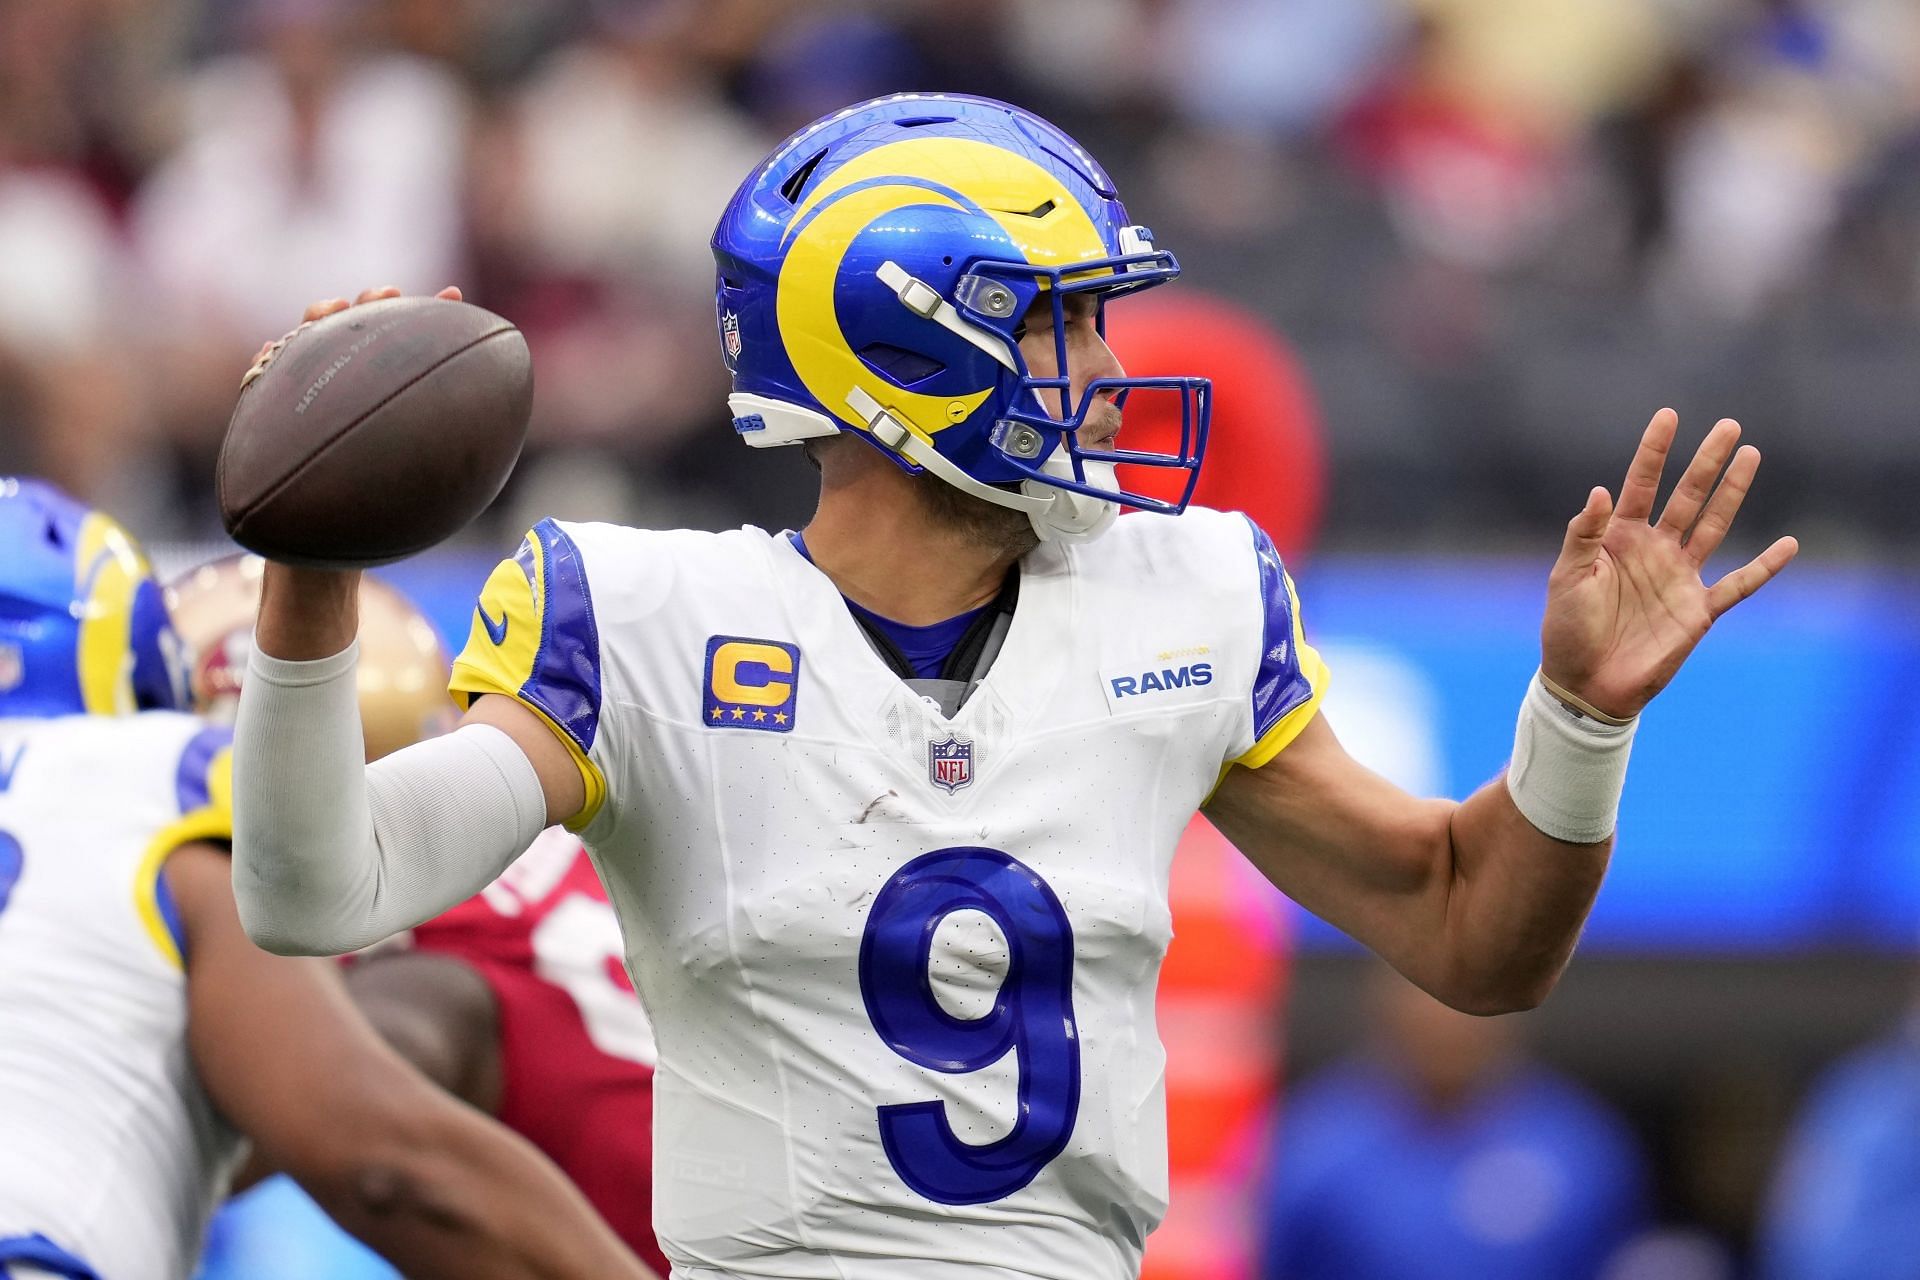 Rams vs Colts weather report: What's in store for Week 4?